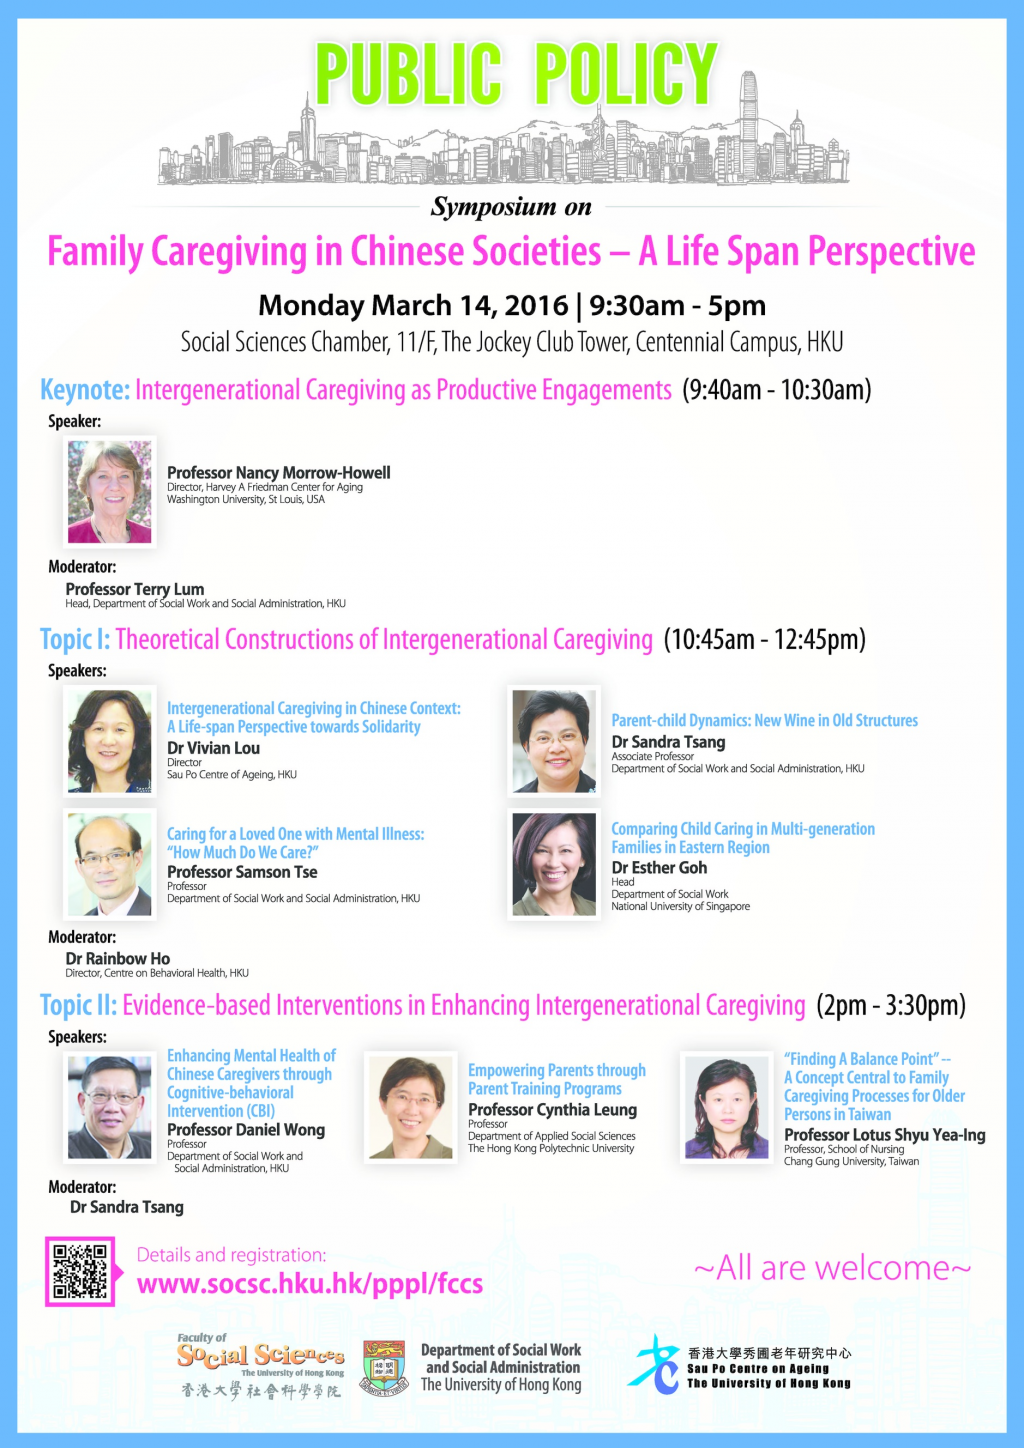 Family Caregiving in Chinese Societies - A Life Span Perspective